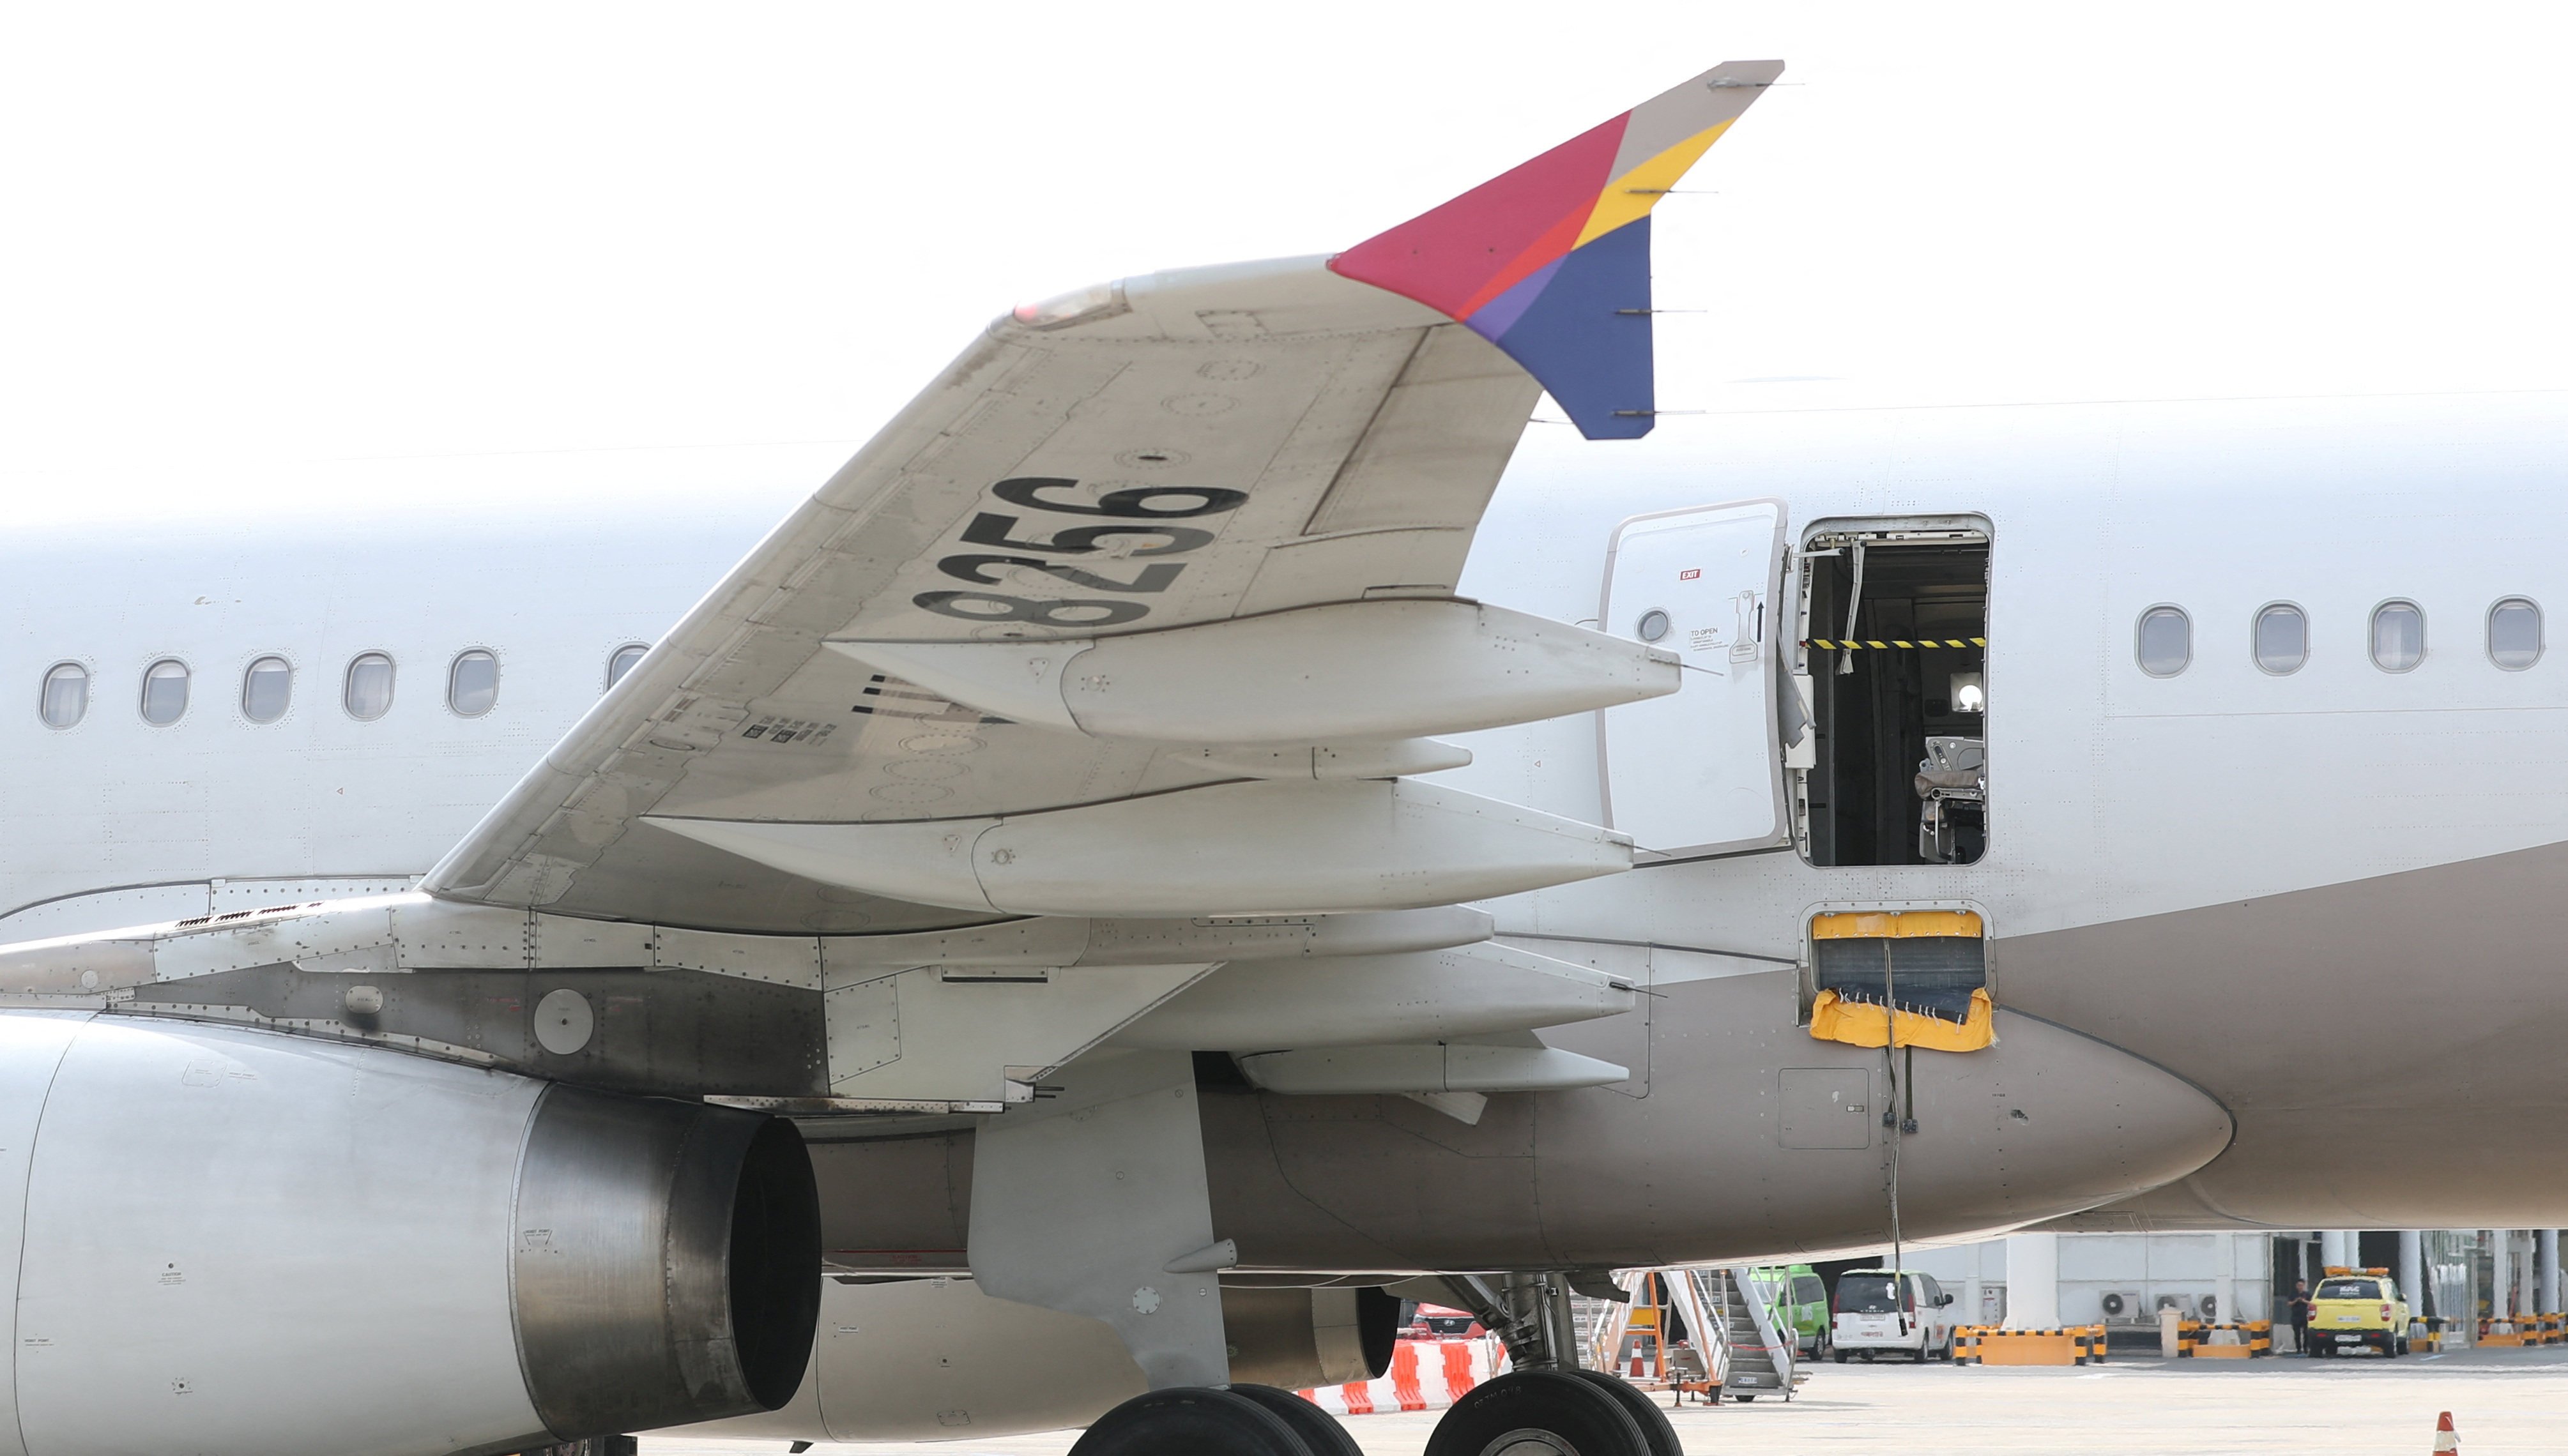 An Asiana Airlines plane is parked after an emergency landing at Daegu airport on May 26. Photo: Yonhap via Reuters